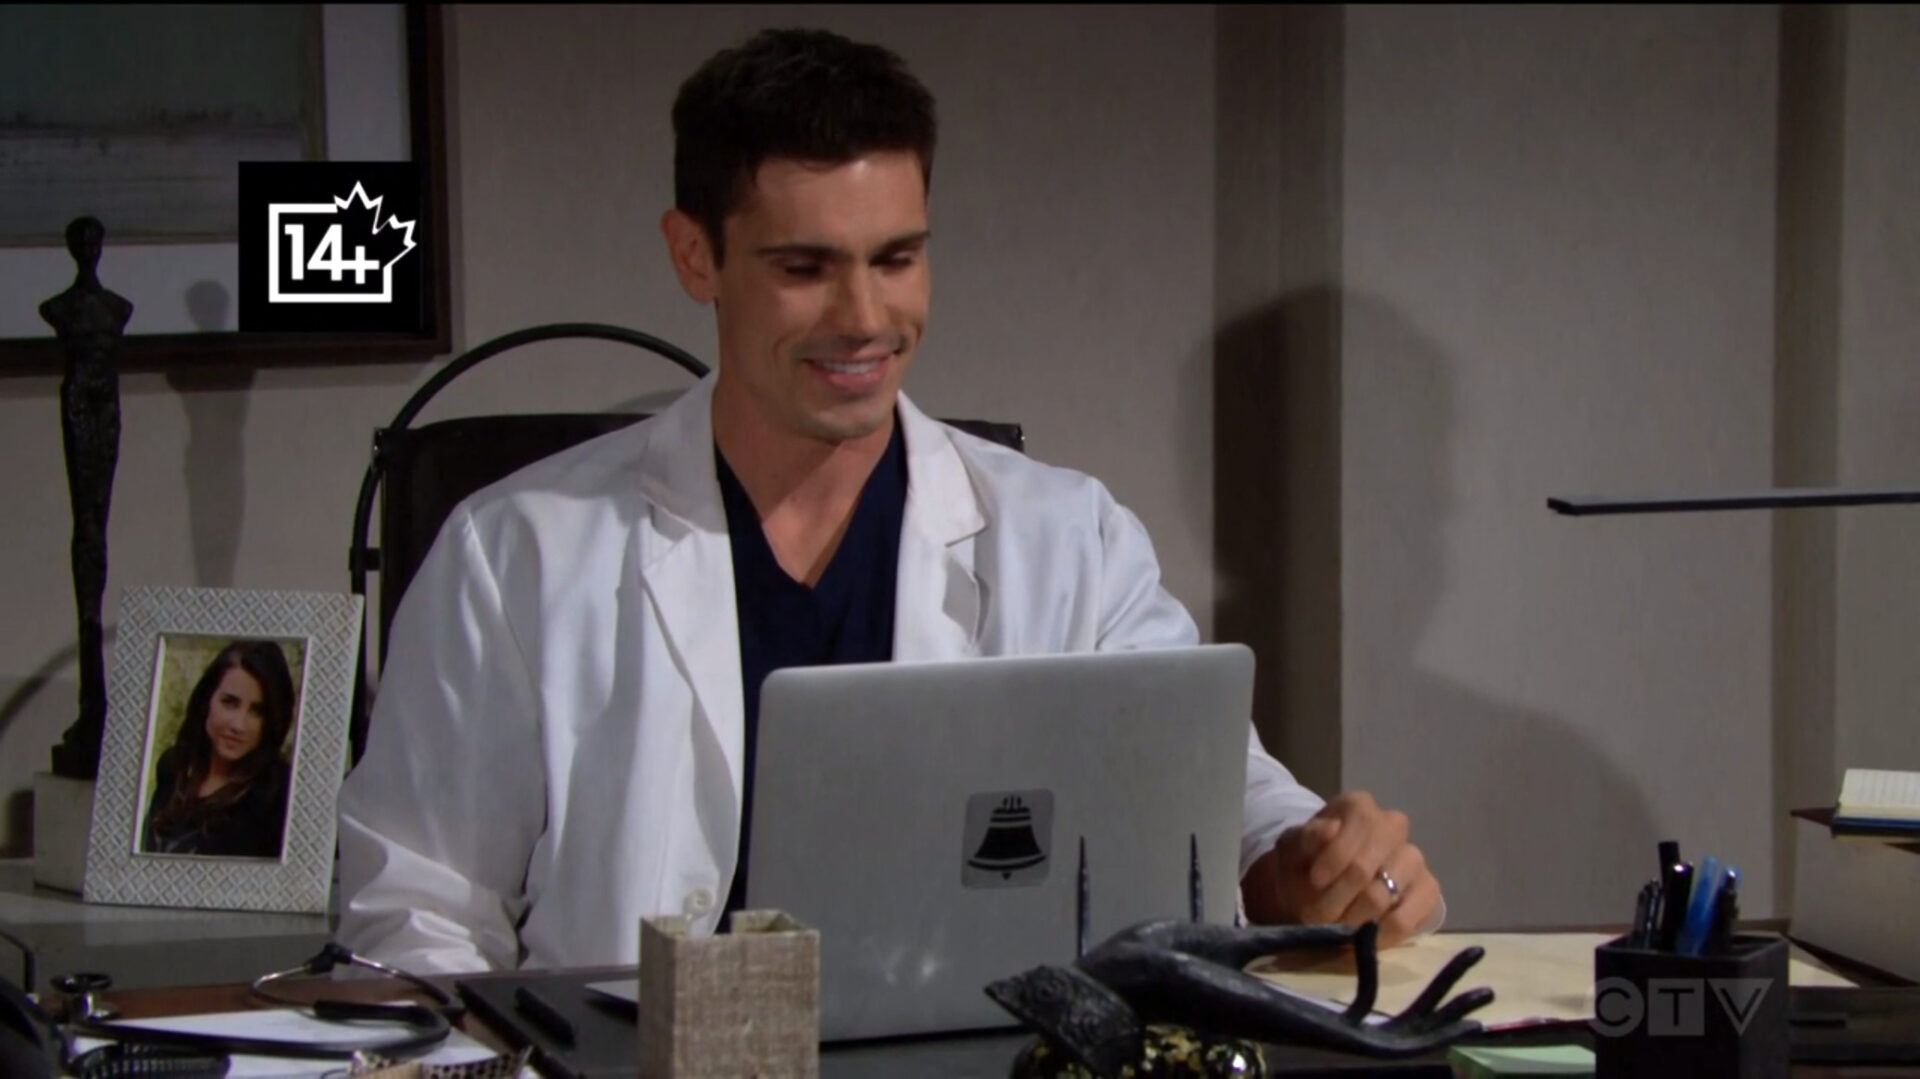 finn at the office on bold and beautiful 